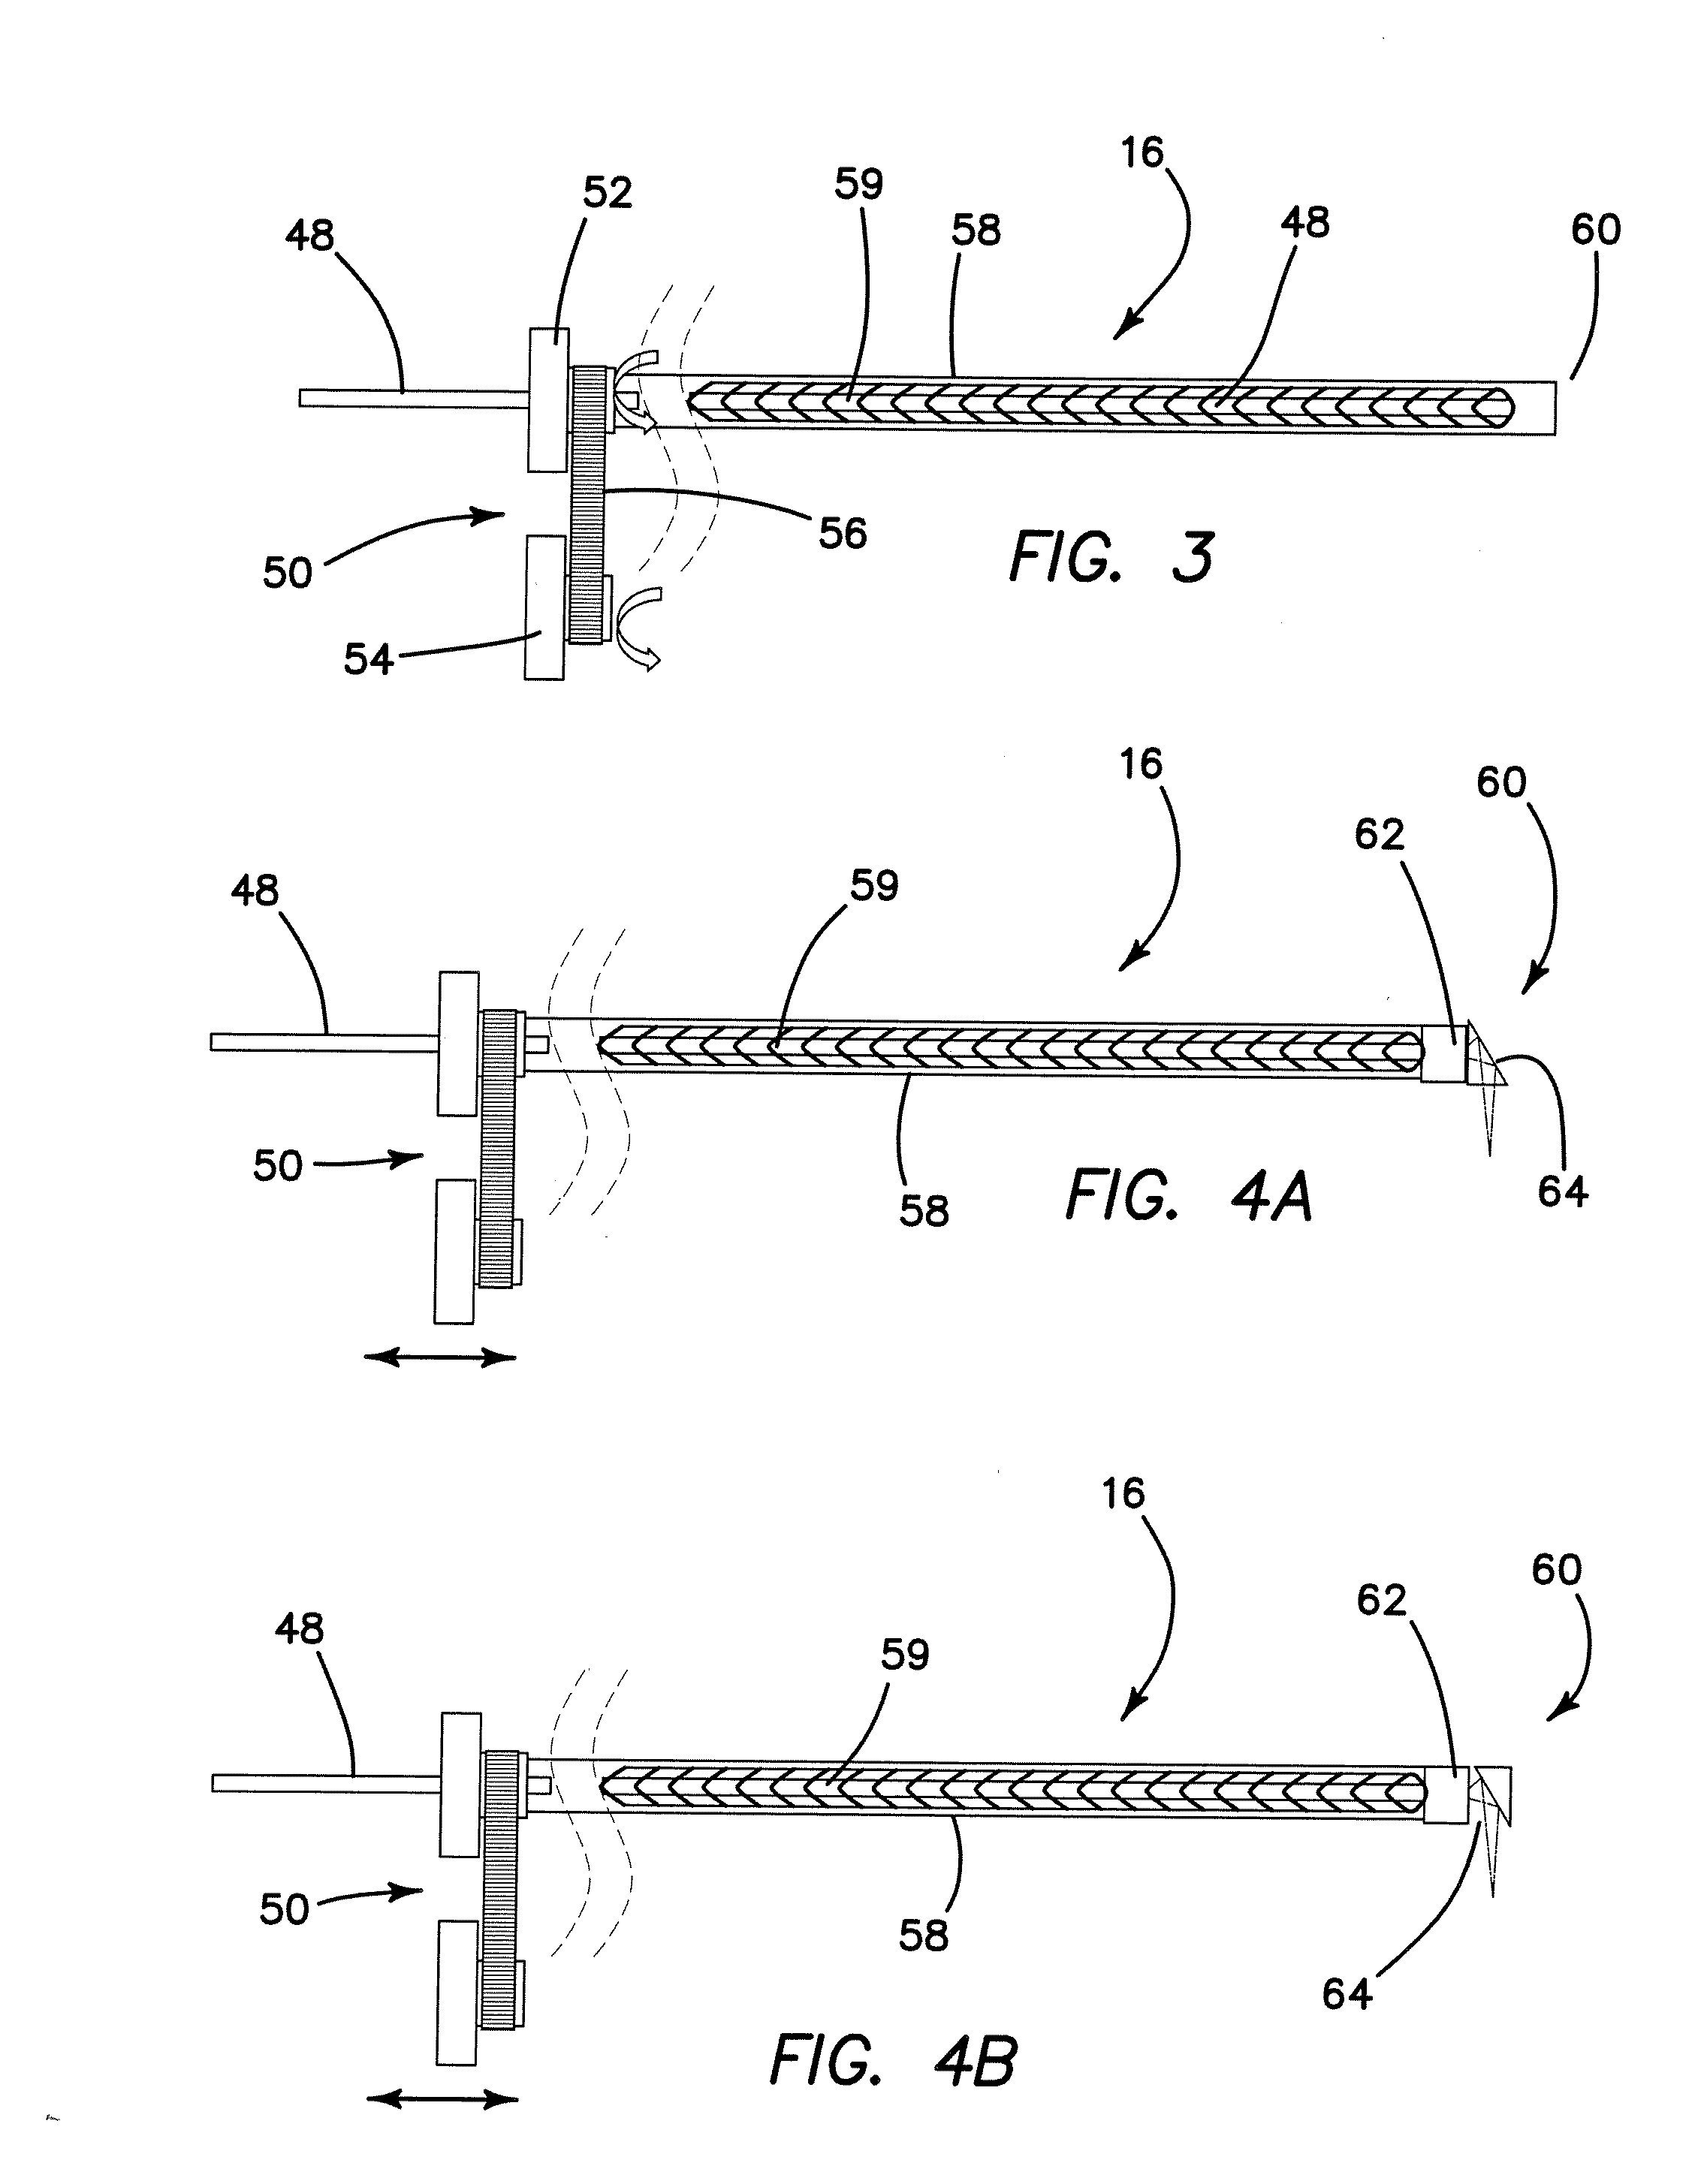 Integrated intraoperative diagnosis and thermal therapy system